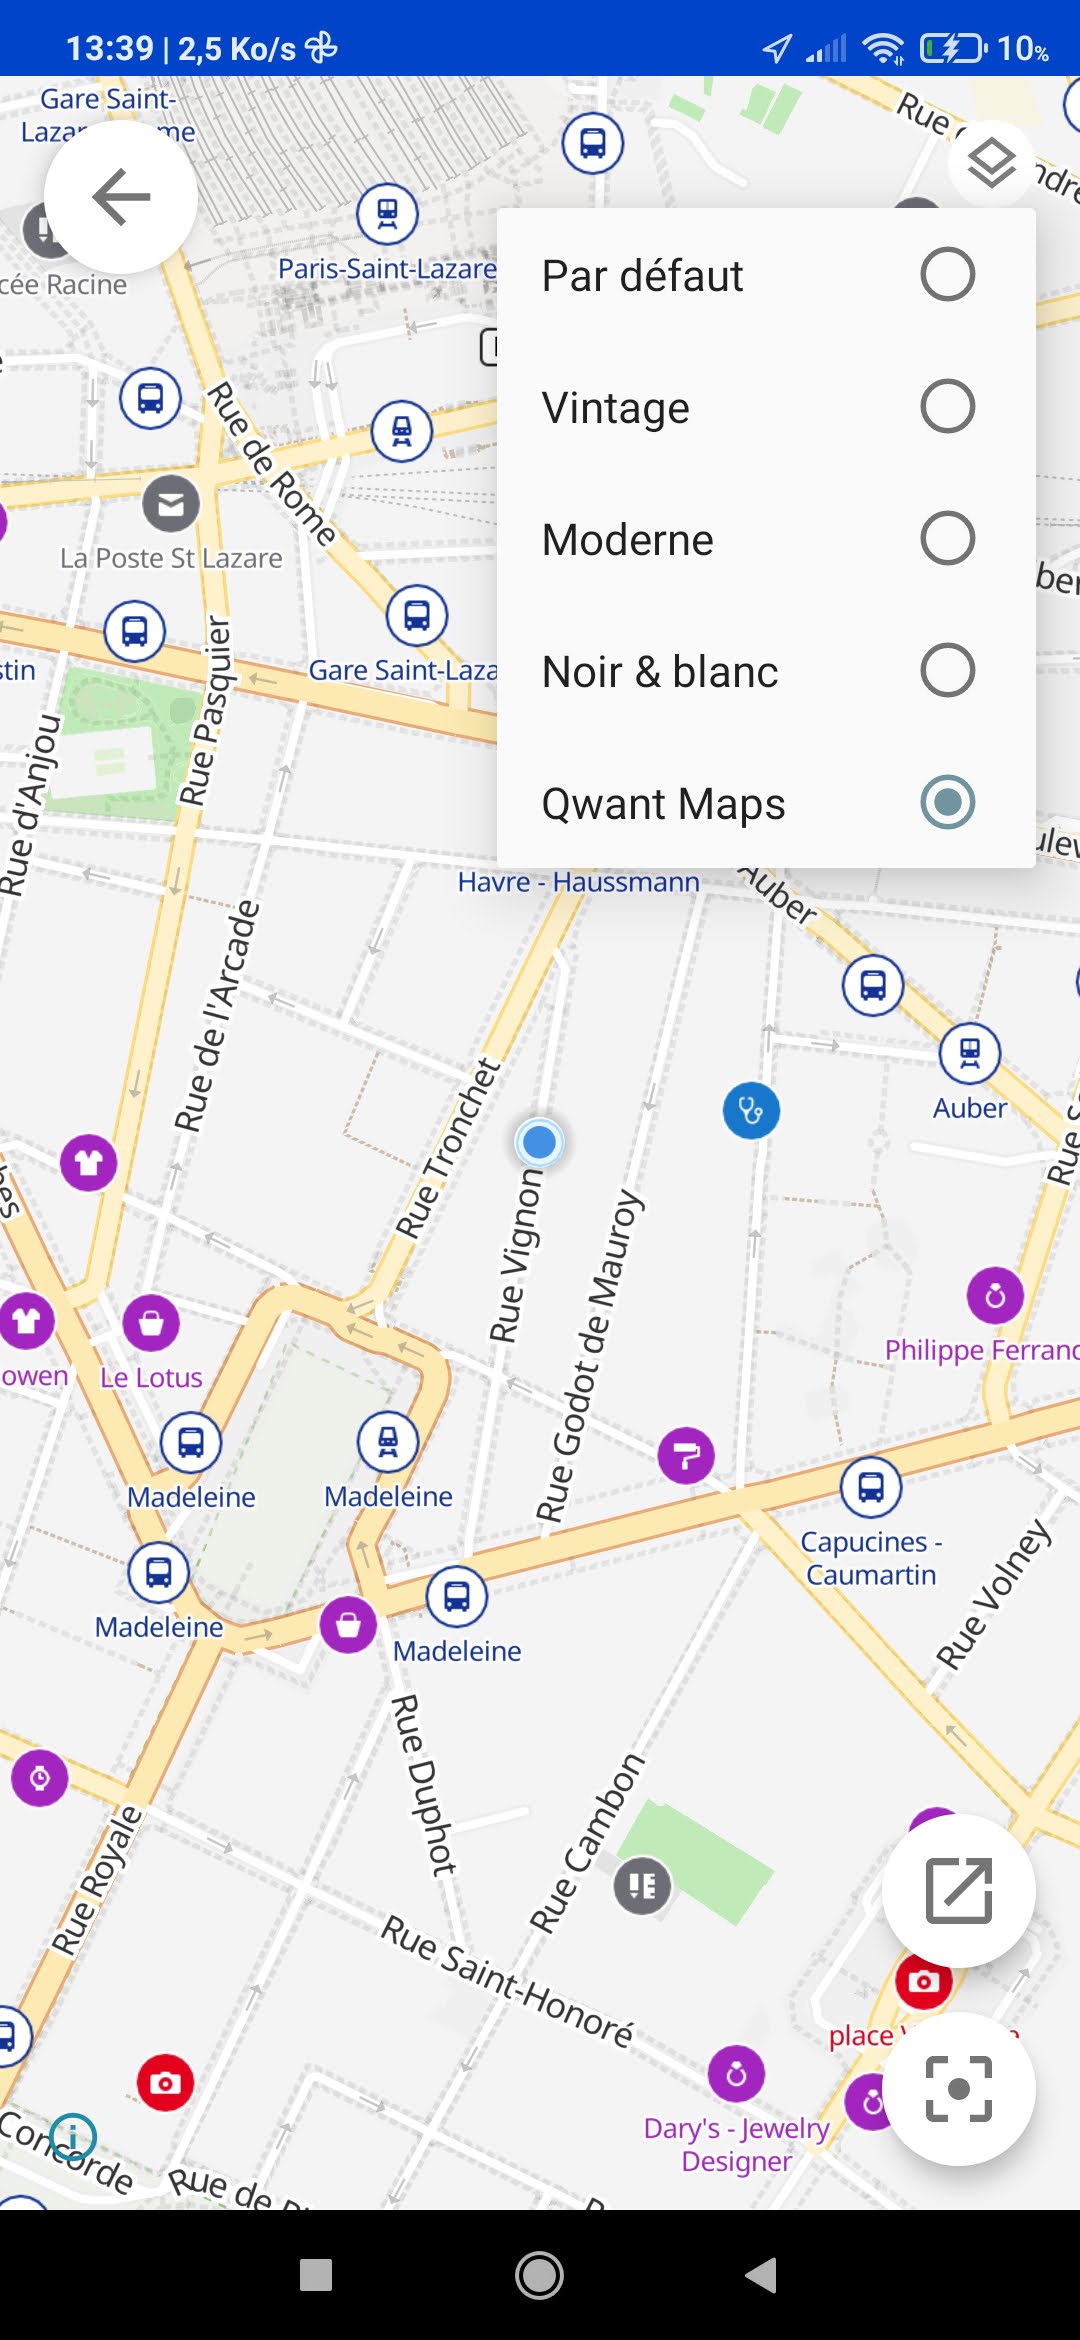 style-map-5-qwant-maps